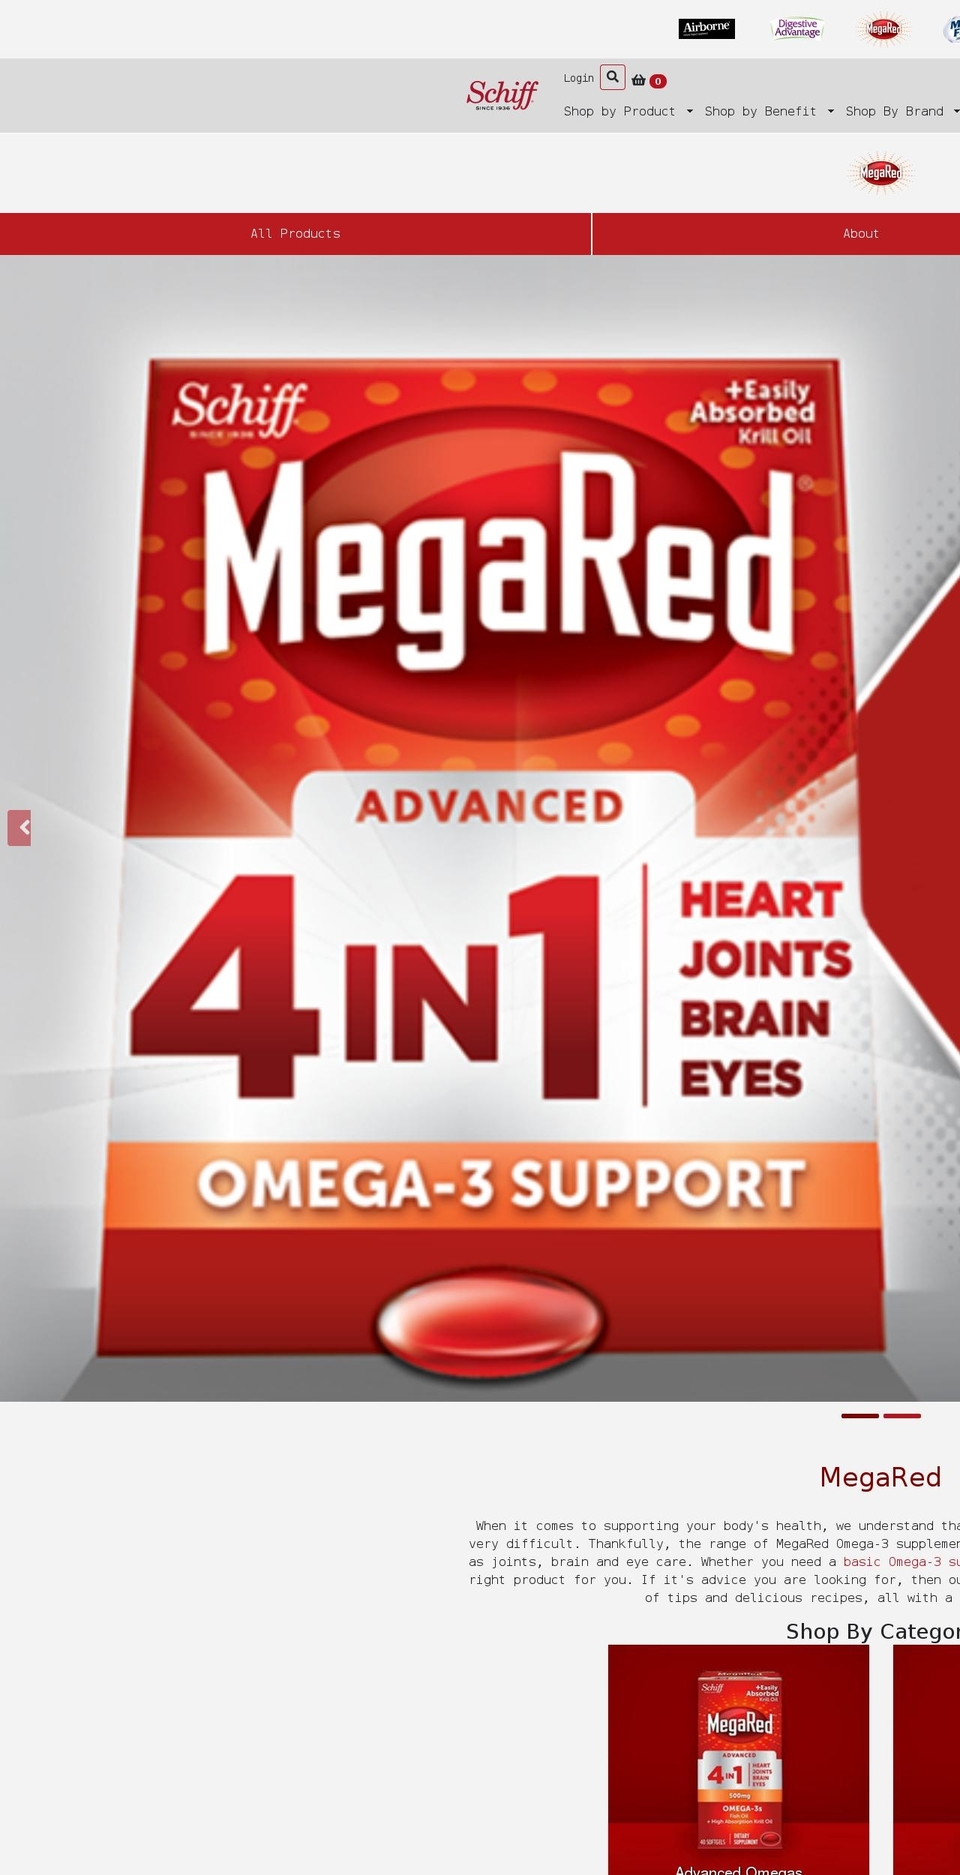 Schiff Vitamins - Updated 8\/3 Shopify theme site example mega-red.tv